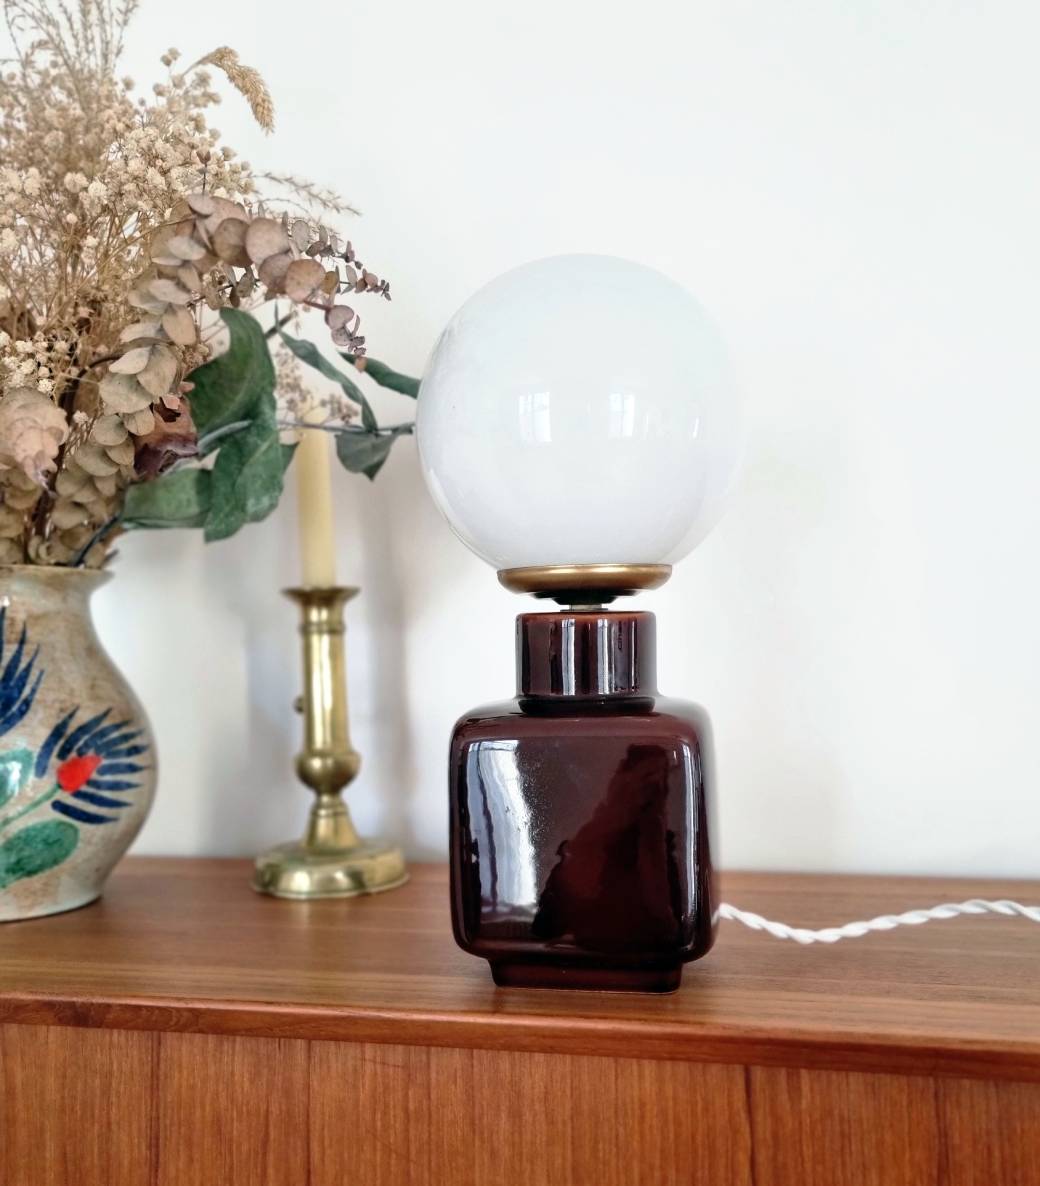 Lampe vintage ancien upcycling slow décoration